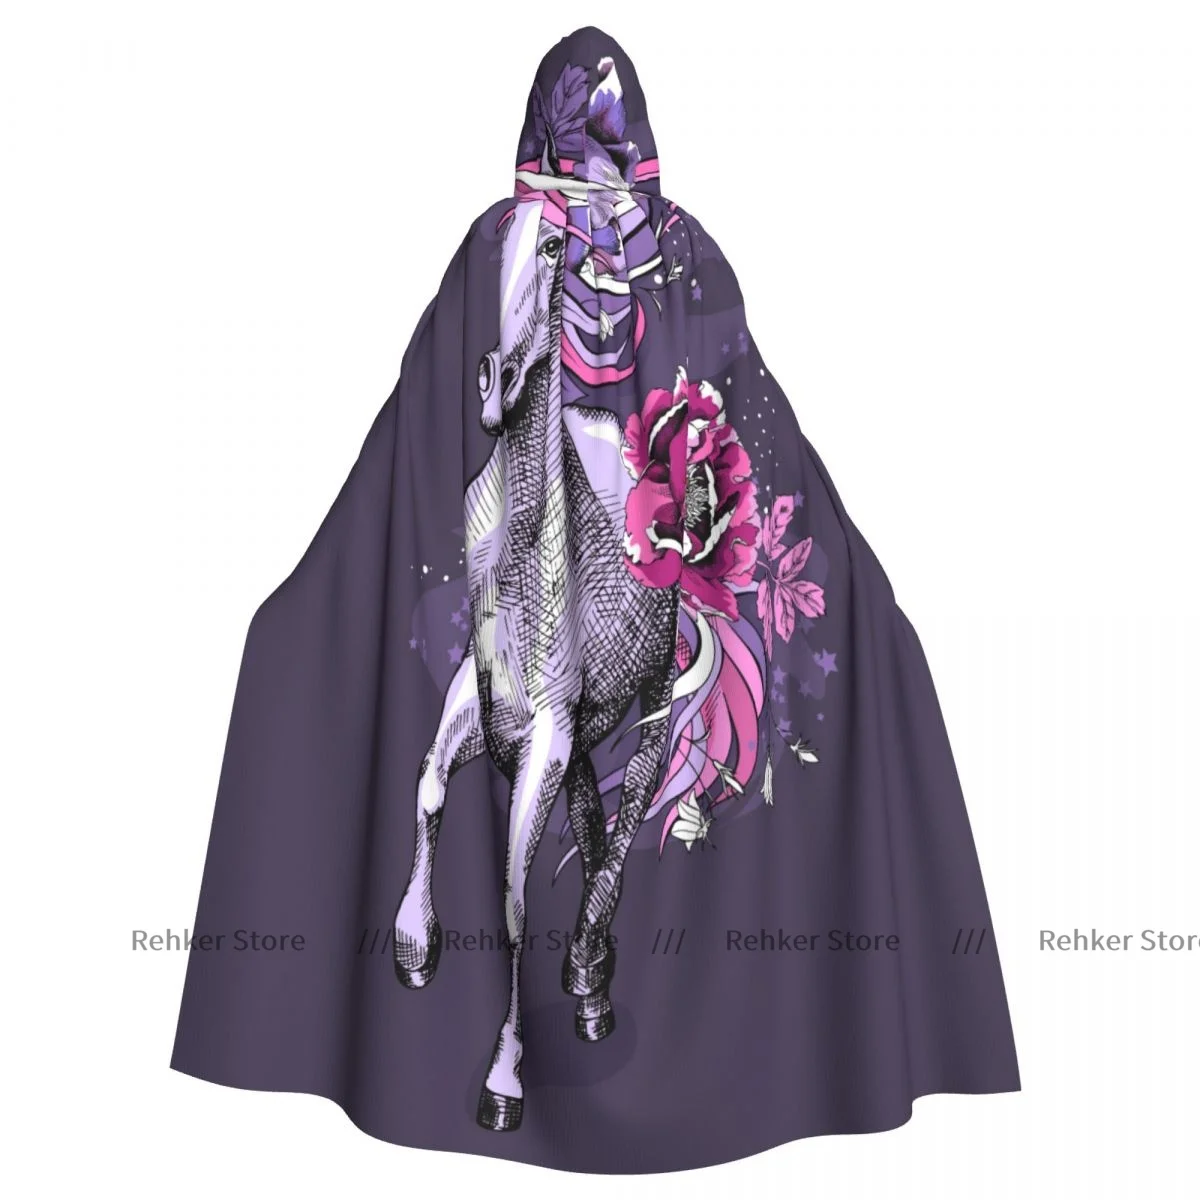 

Unicorn With Floral Pattern Hooded Cloak Coat Halloween Cosplay Costume Vampire Devil Wizard Cape Gown Party